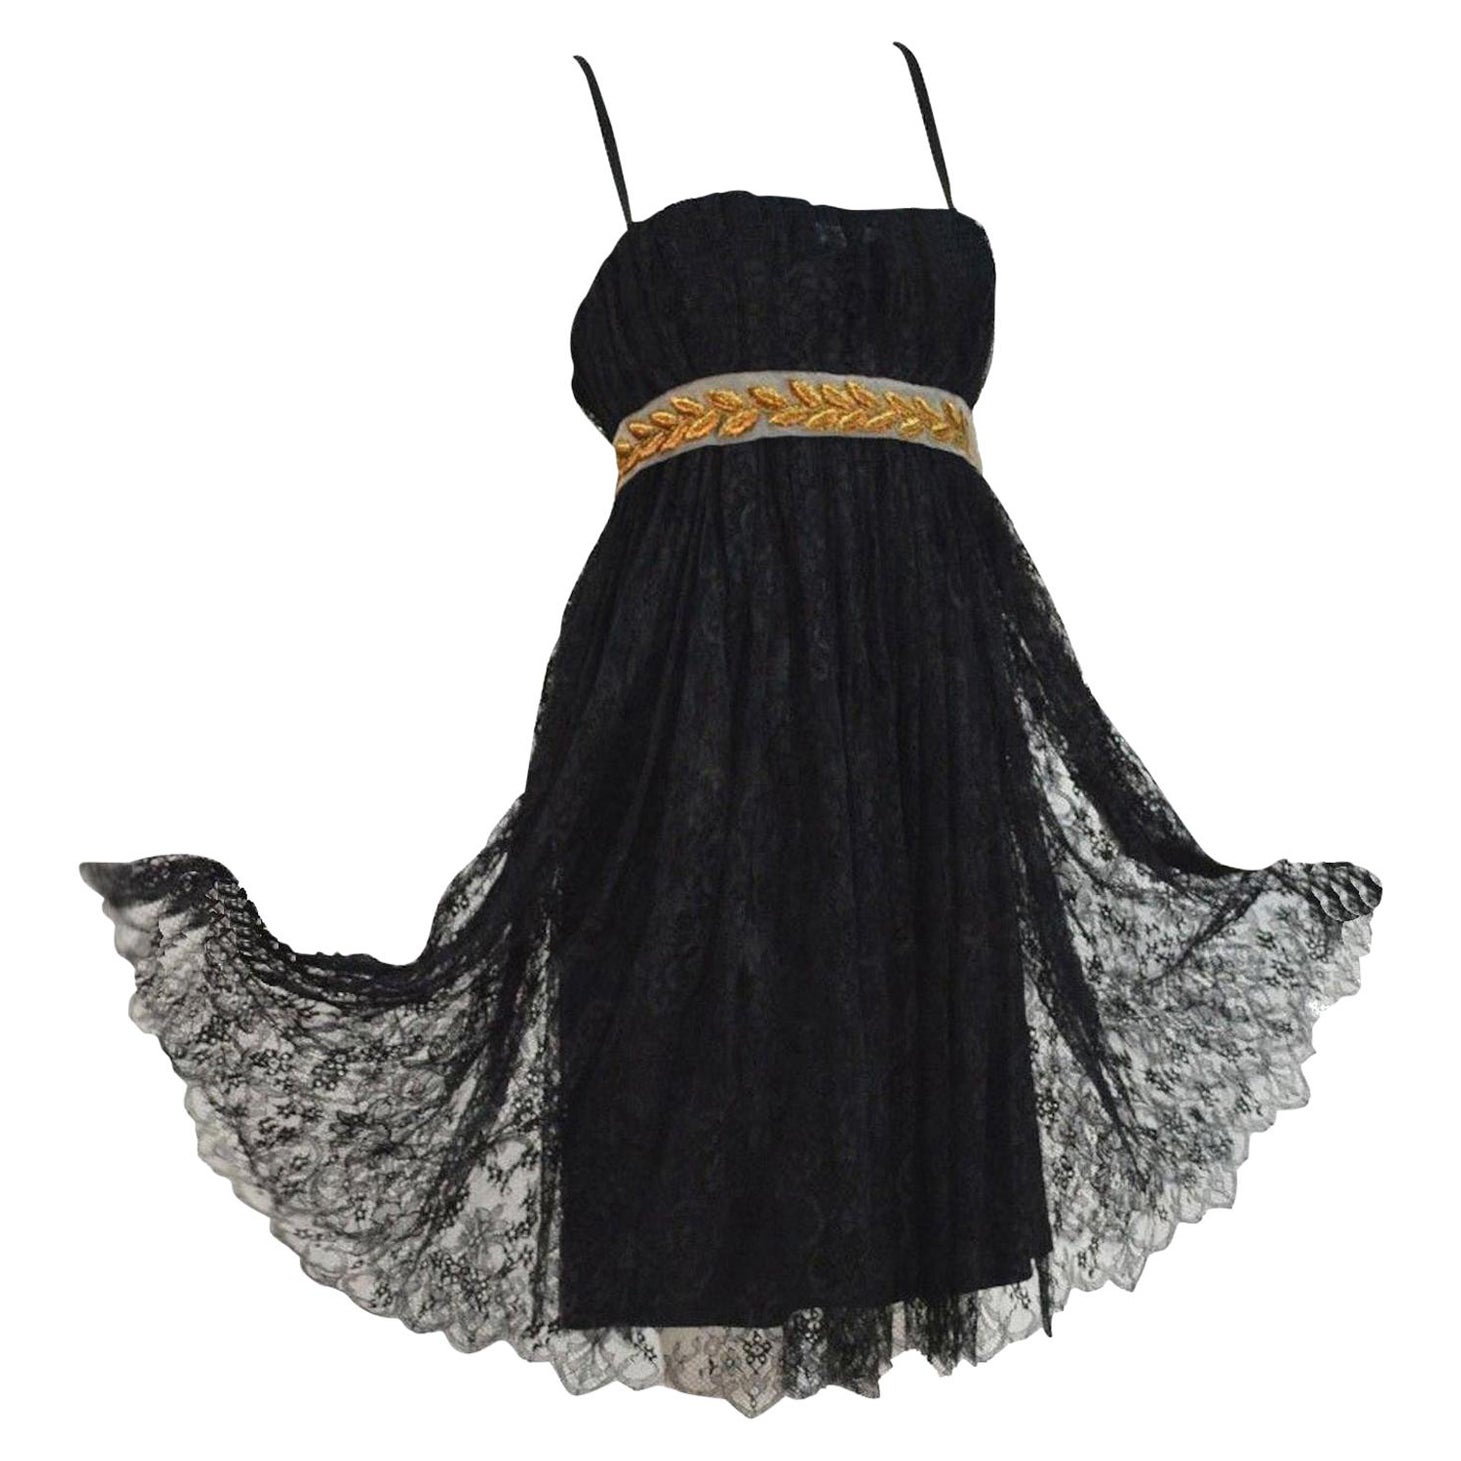 UNWORN Dolce & Gabbana Black Corset French Lace Laurel Evening Cocktail Dress 38 In Good Condition For Sale In Switzerland, CH